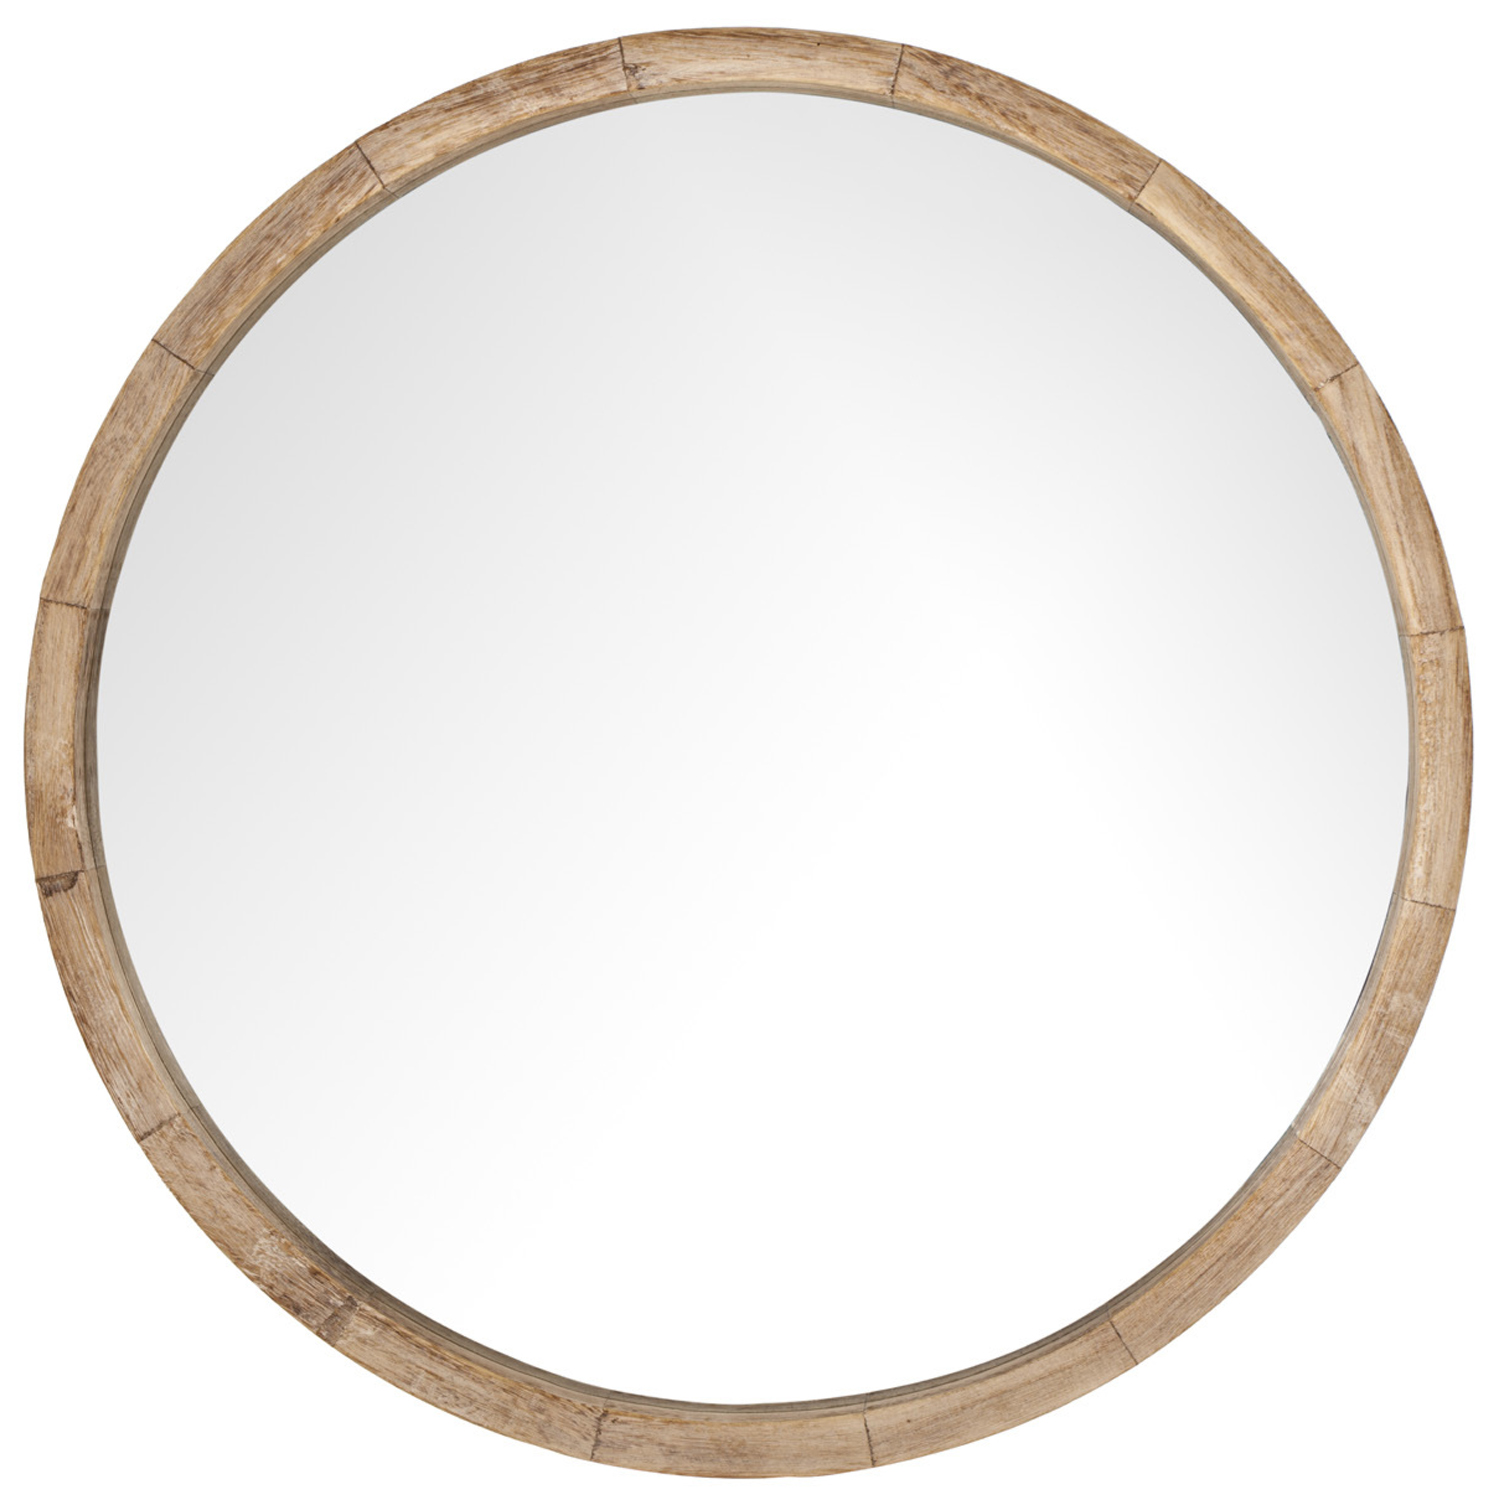 Natural Solid Wood Round Mirror 52cm Image